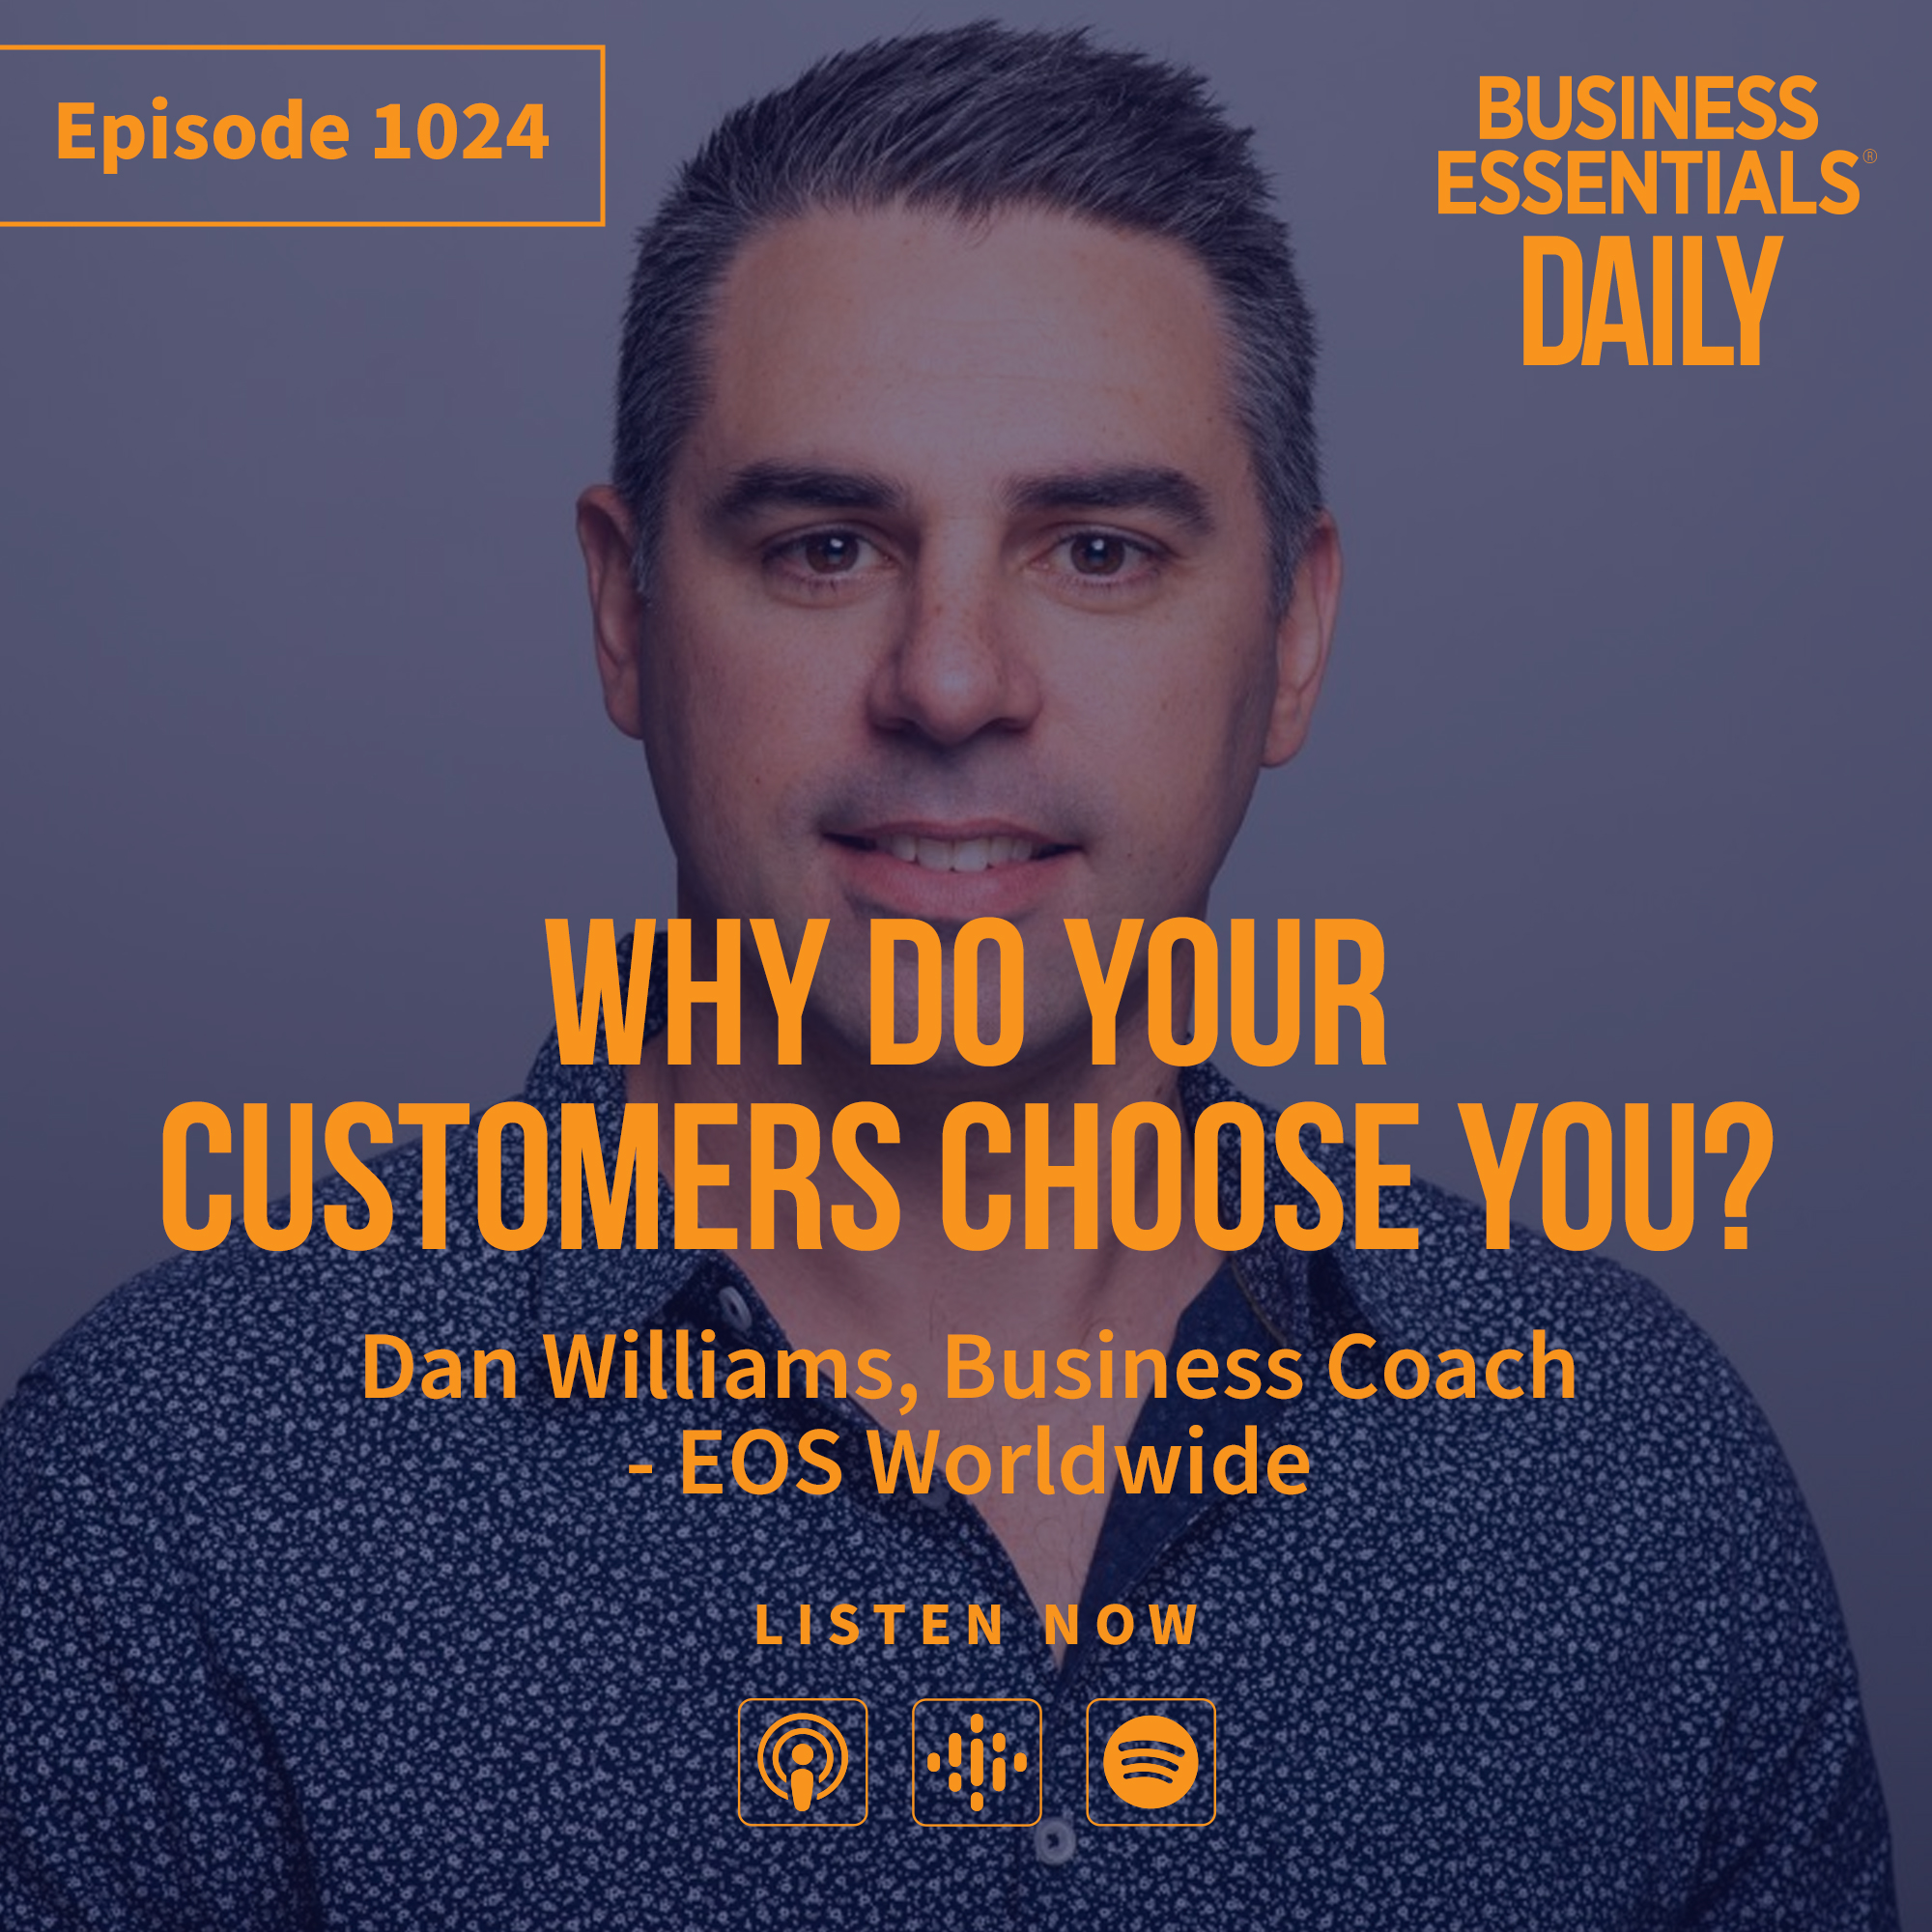 Why do your customers choose you?